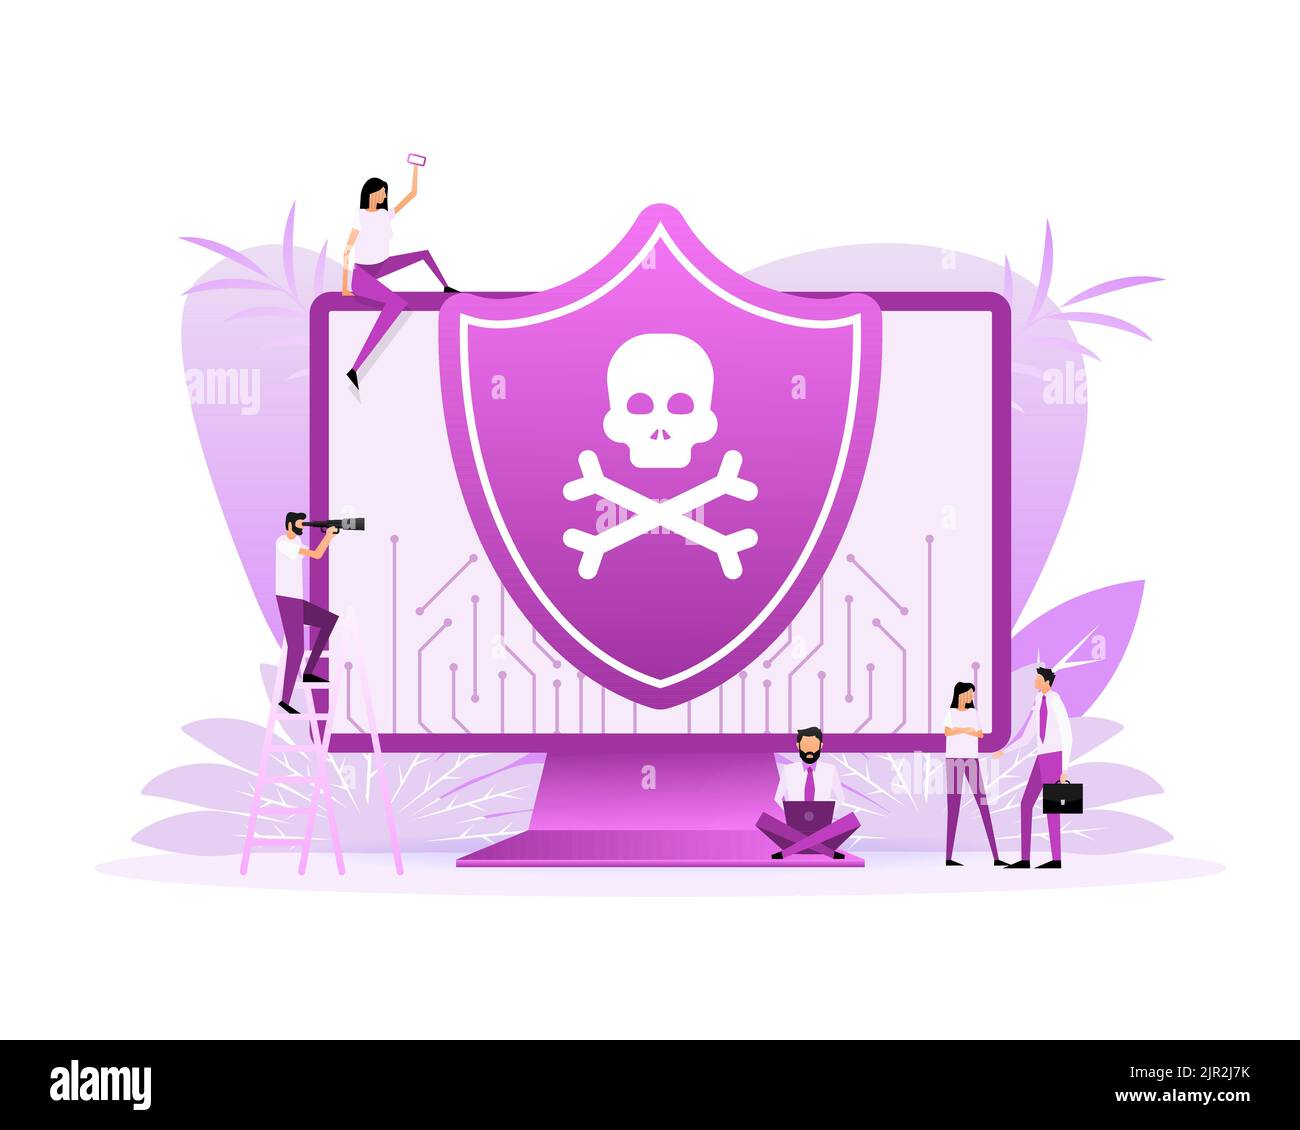 Cyber security vector logo with shield and check mark. Vector illustration Stock Vector